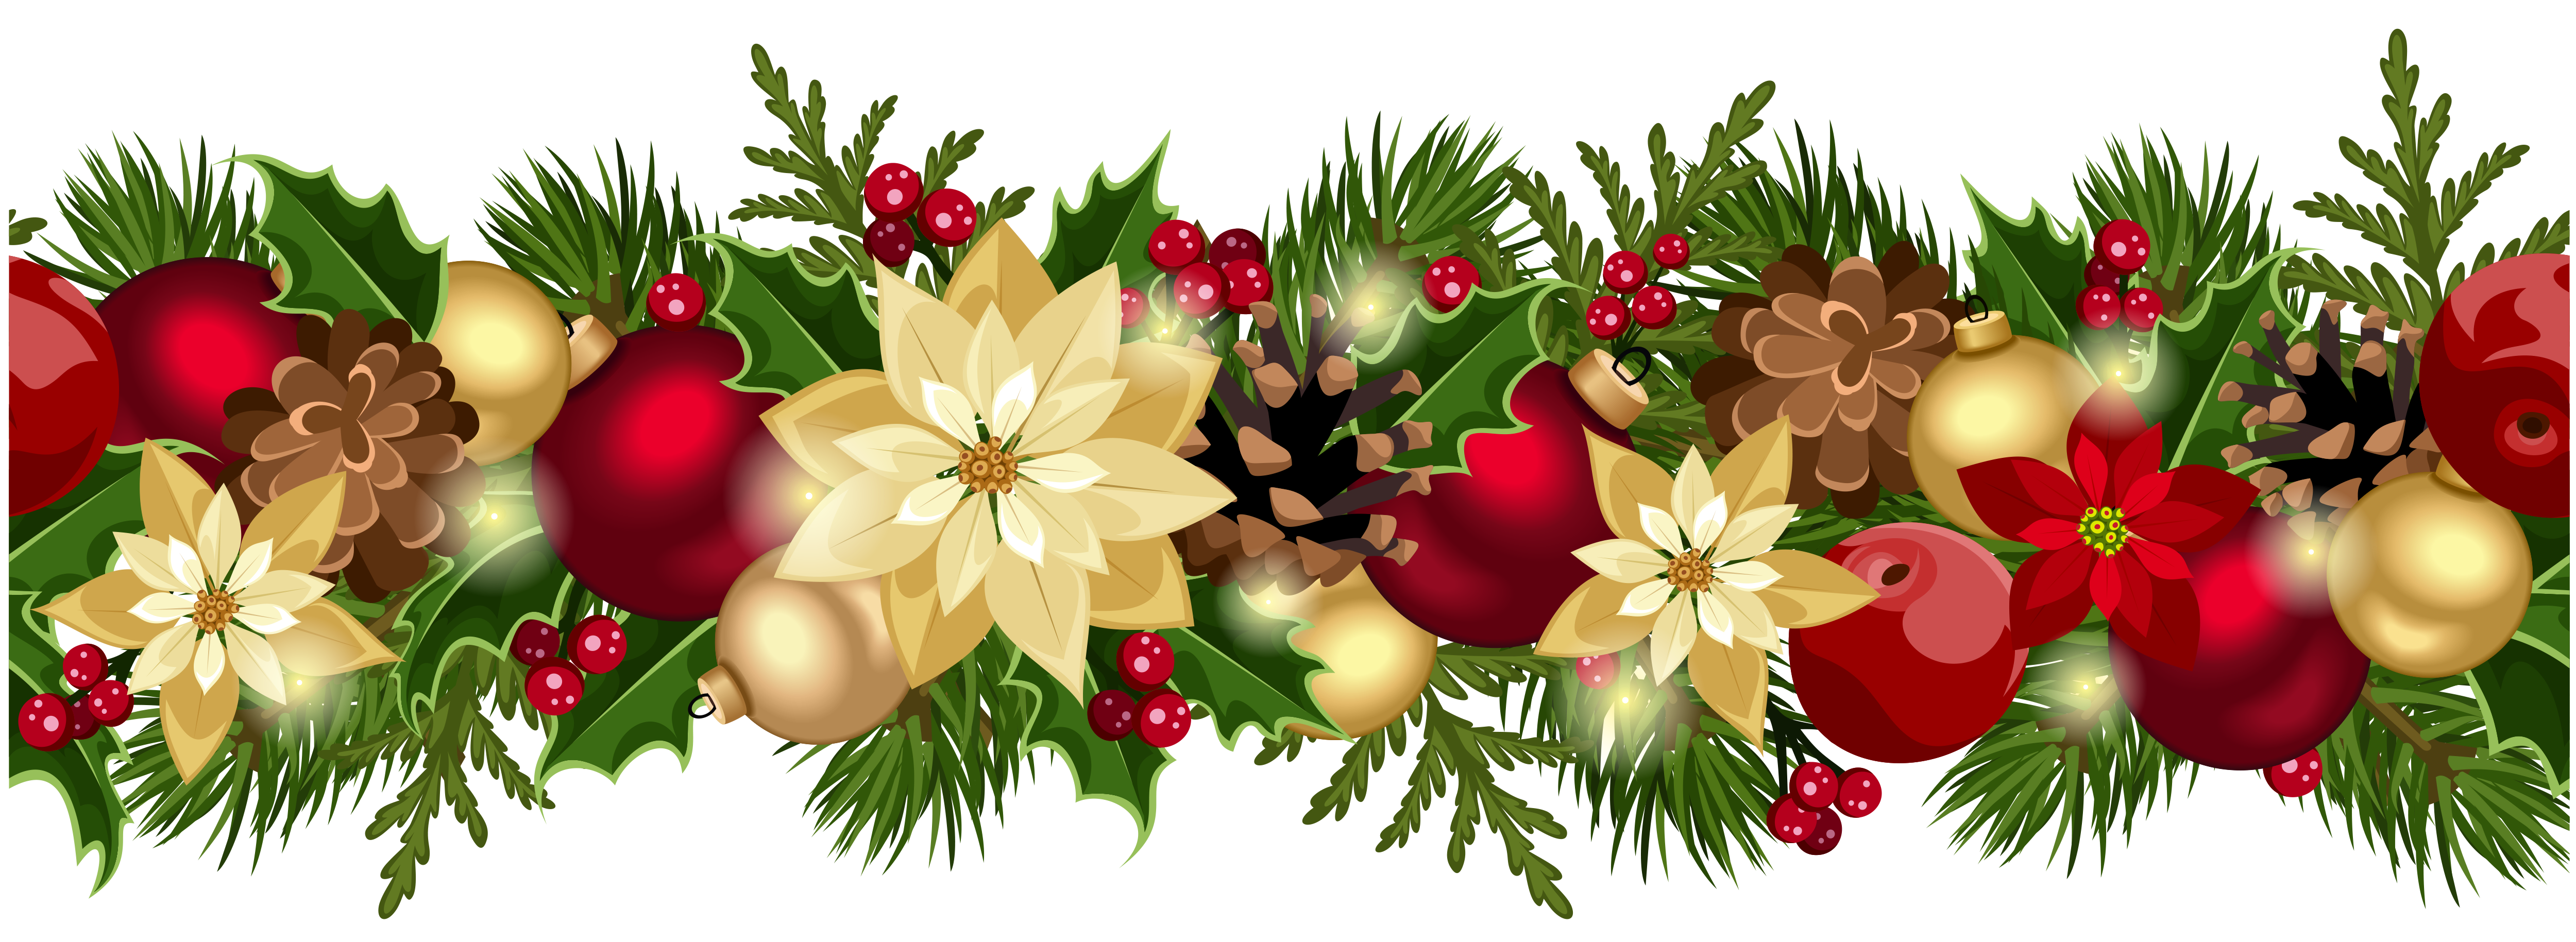 Poinsettias clipart banner. Holiday garland crafthubs background